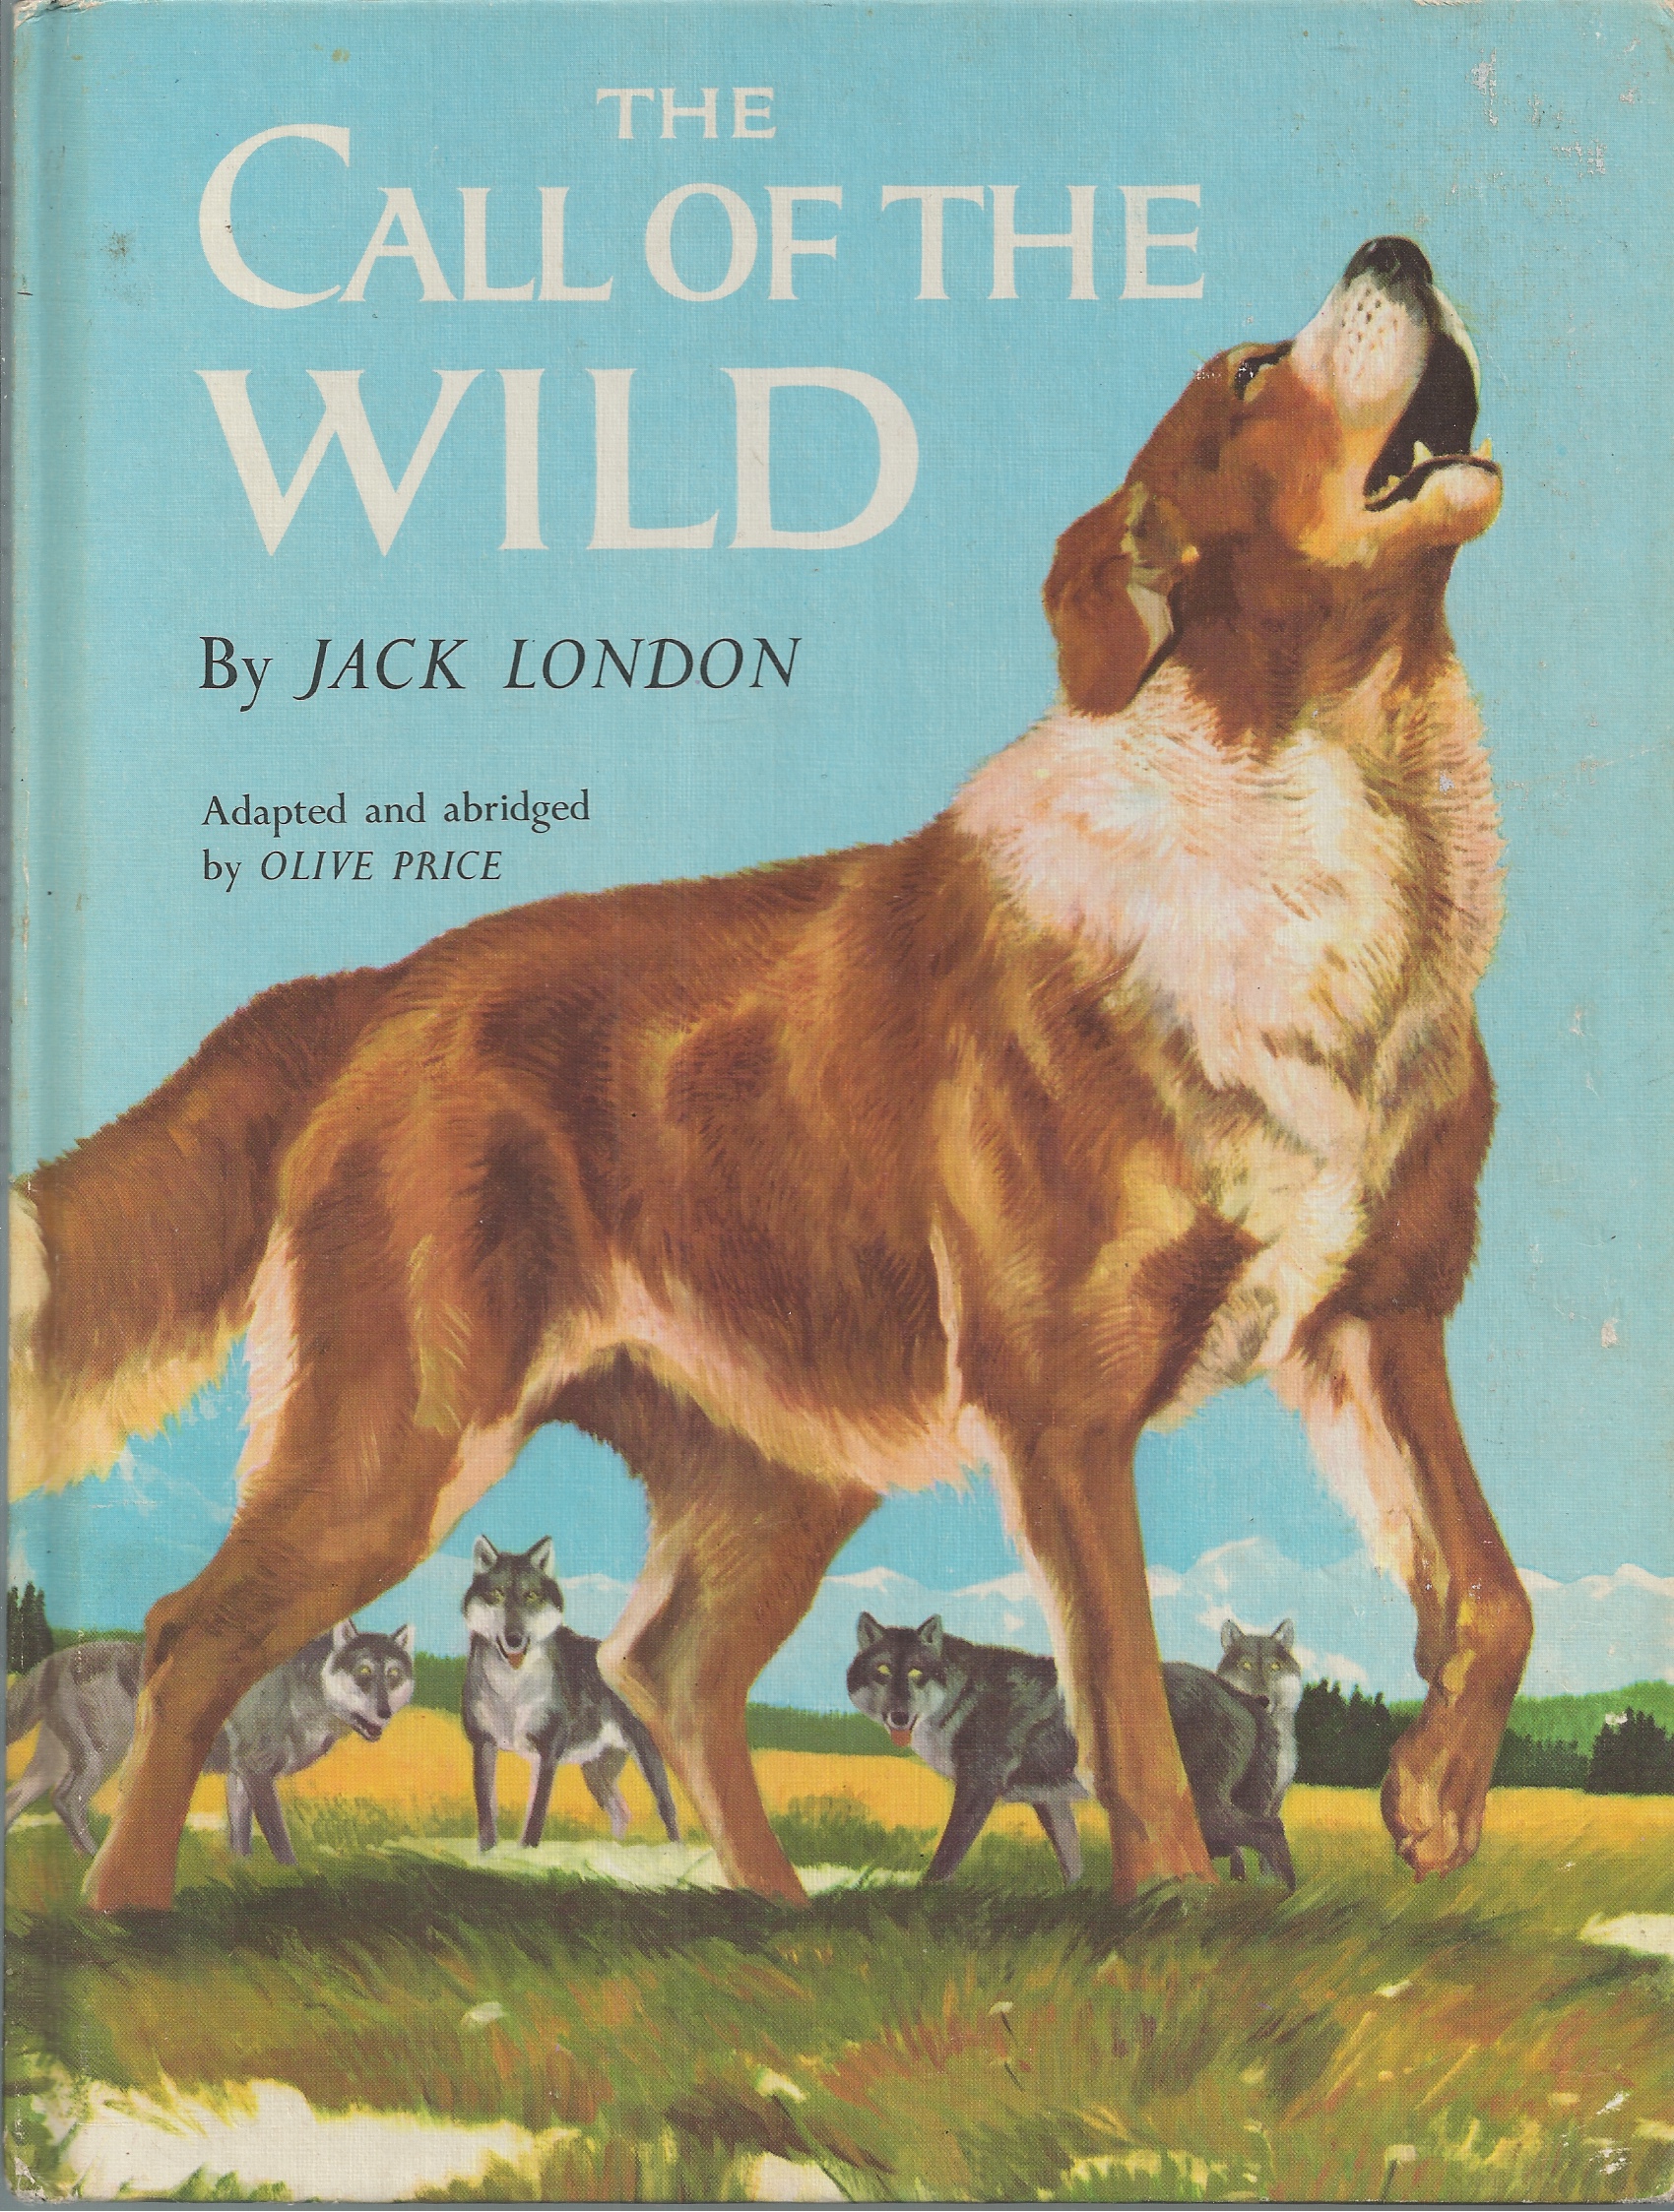 LONDON JACK, ADAPTED AND ABRIDGED BY OLIVE PRICE - Call of the Wild, the